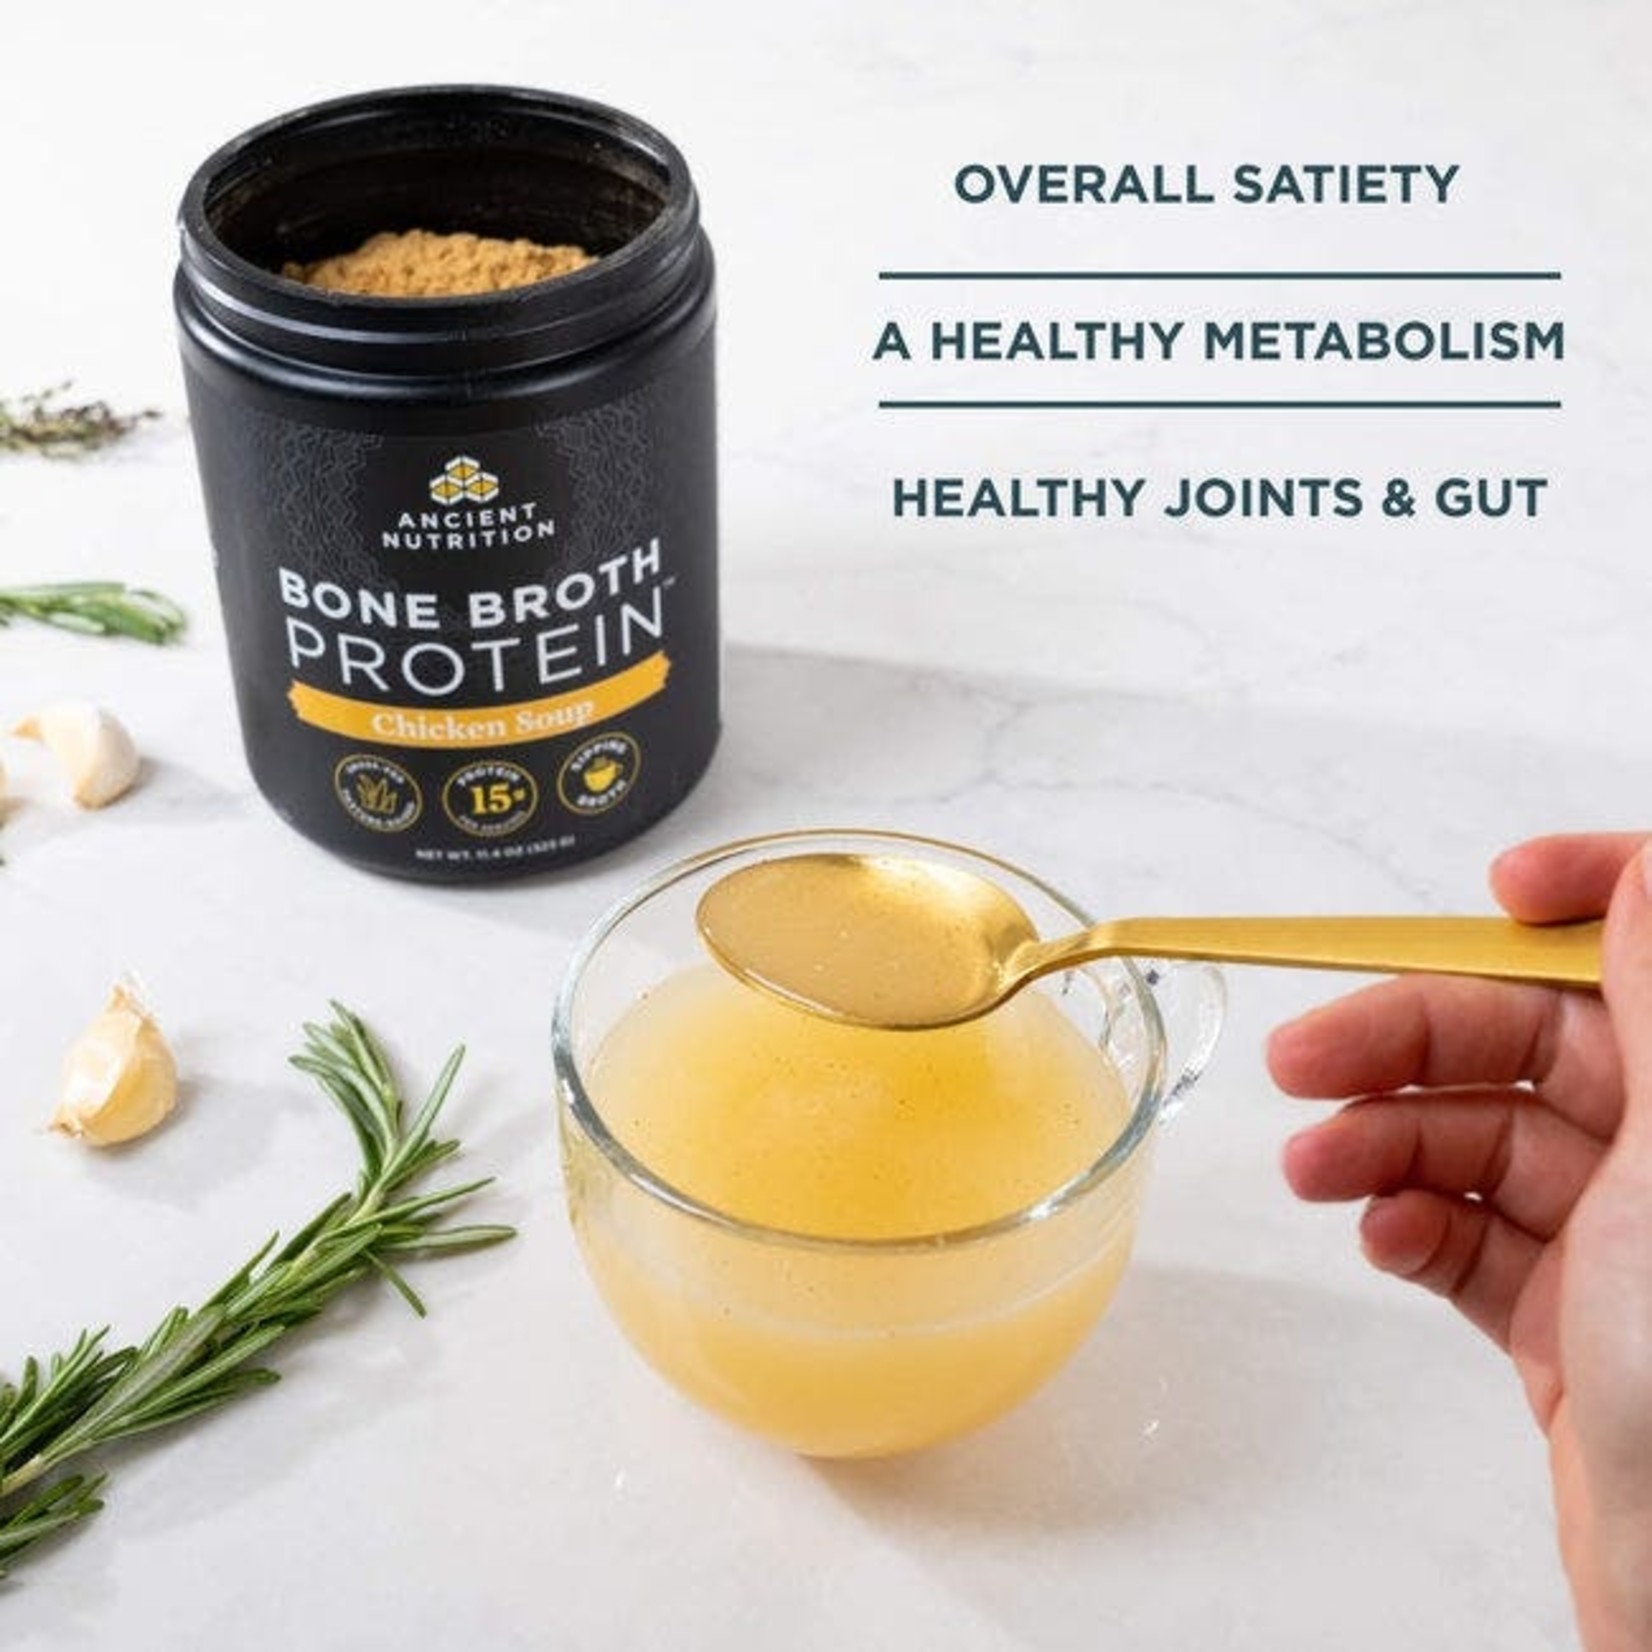 Ancient Nutrition Ancient Nutrition - Bone Broth Protein Chicken Soup - 322 g